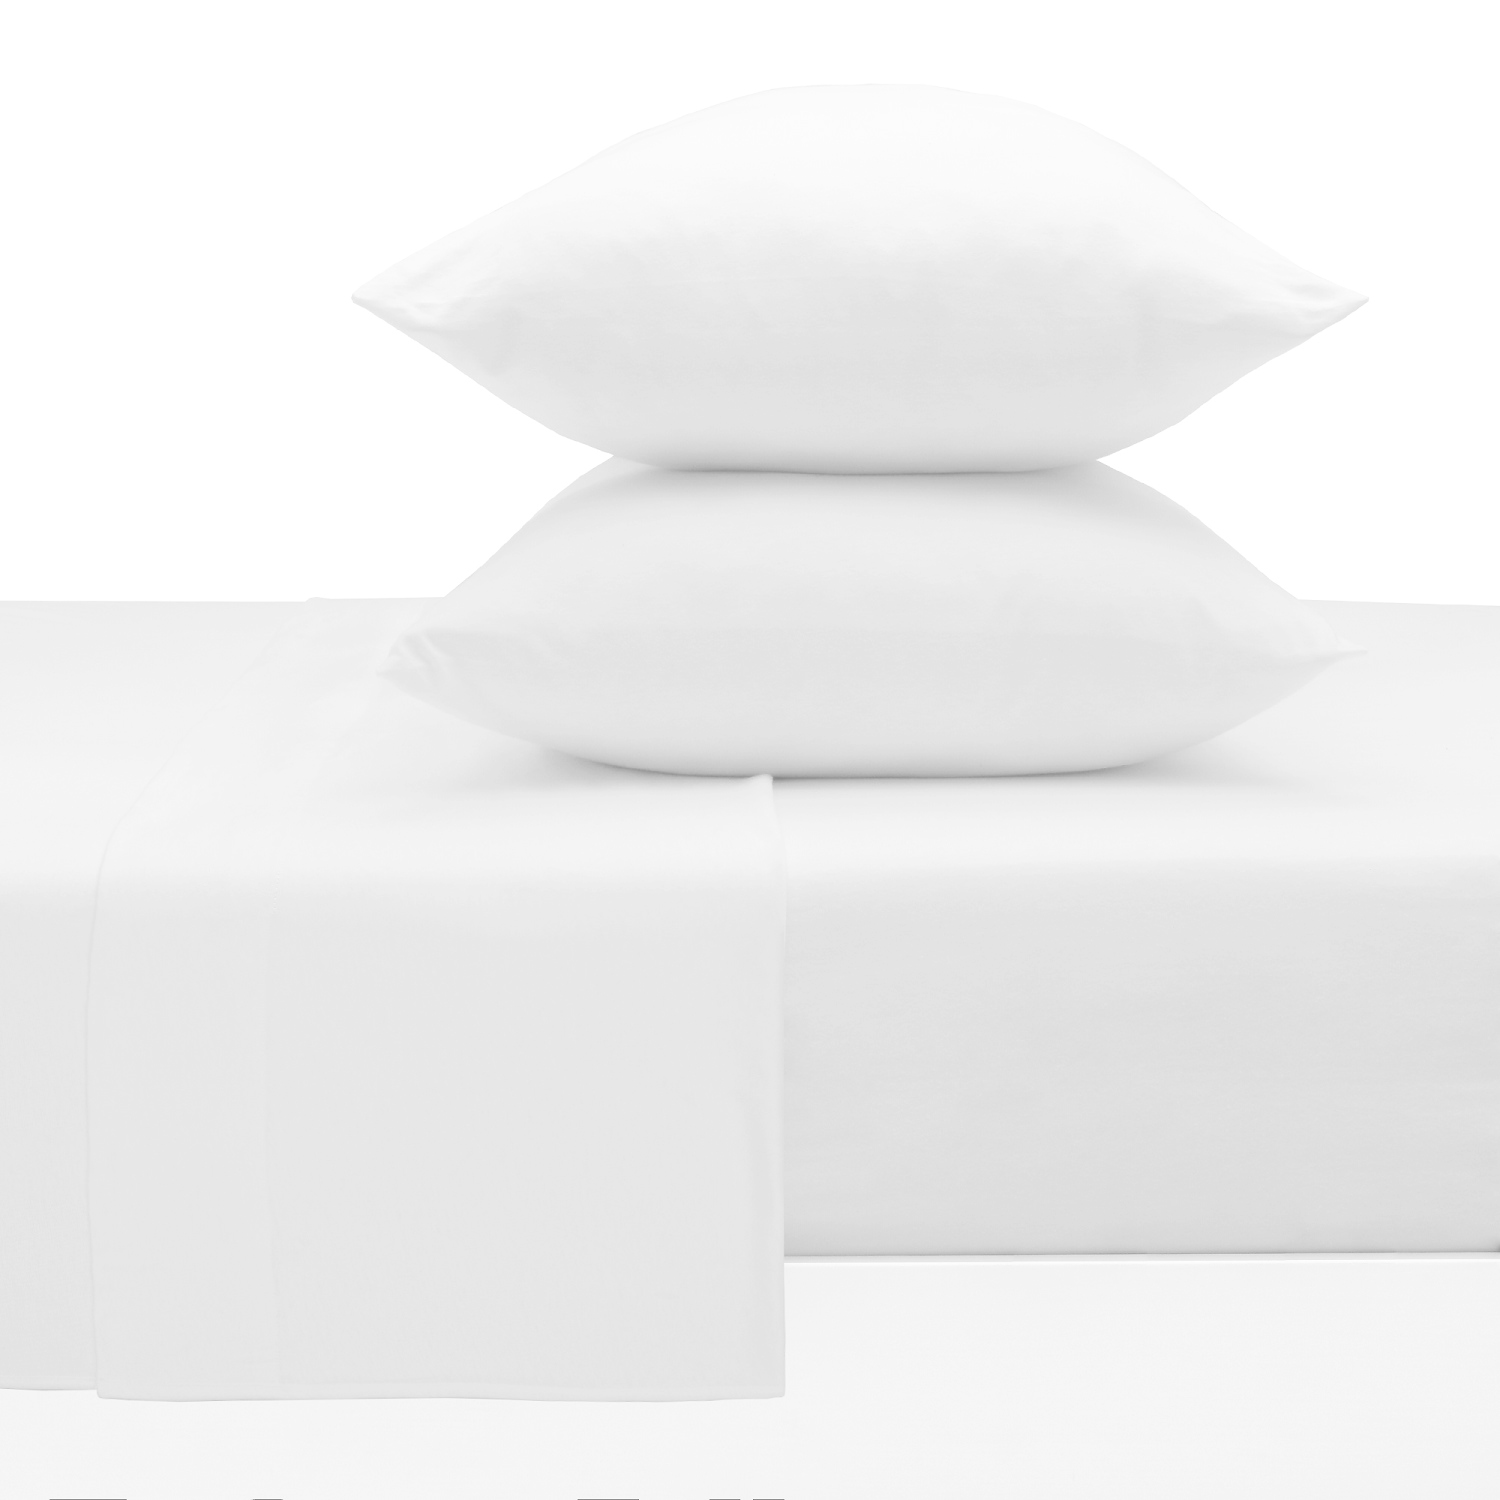 Mellanni Jersey Sheet Set 4 Piece 100% Cotton Deep Pocket Bed Sheets and Pillowcases, Queen, White - image 1 of 9